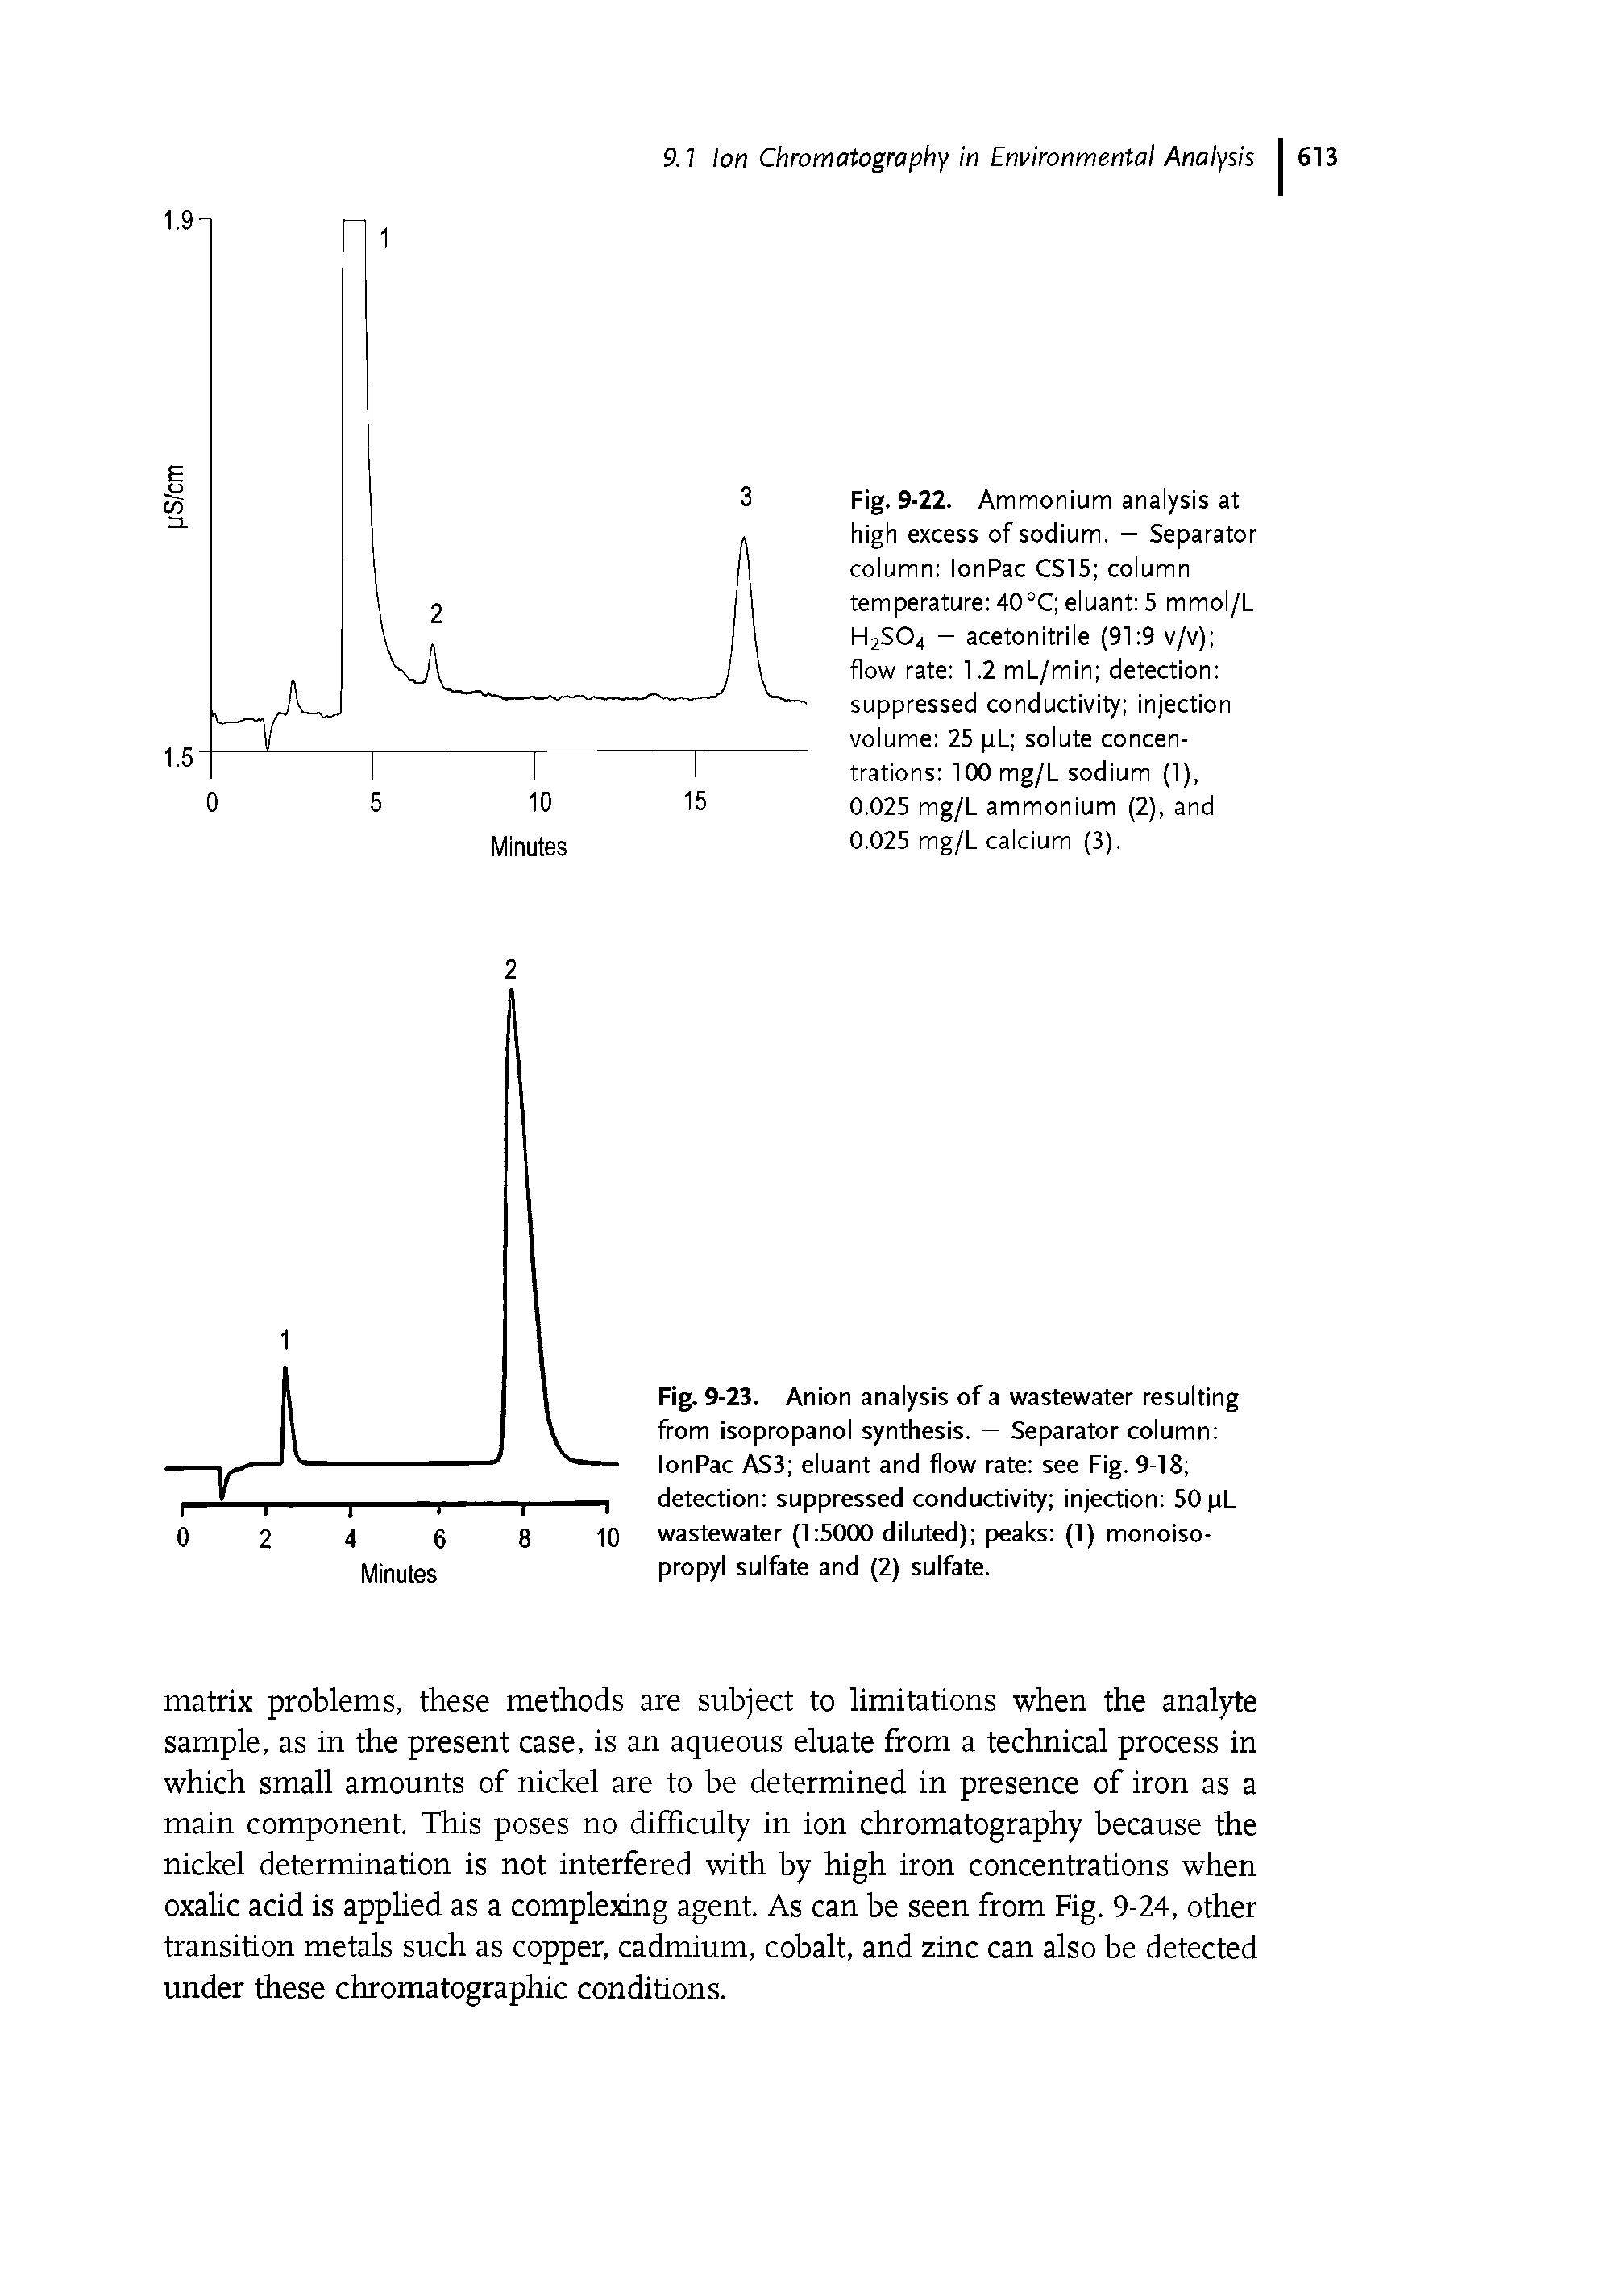 Fig. 9-22. Ammonium analysis at high excess of sodium. - Separator column lonPac CS15 column temperature 40°C eluant 5 mmol/L H2SO4 - acetonitrile (91 9 v/v) flow rate 1.2 mL/min detection suppressed conductivity injection volume 25 pL solute concentrations 100 mg/L sodium (1), 0.025 mg/L ammonium (2), and 0.025 mg/L calcium (3).